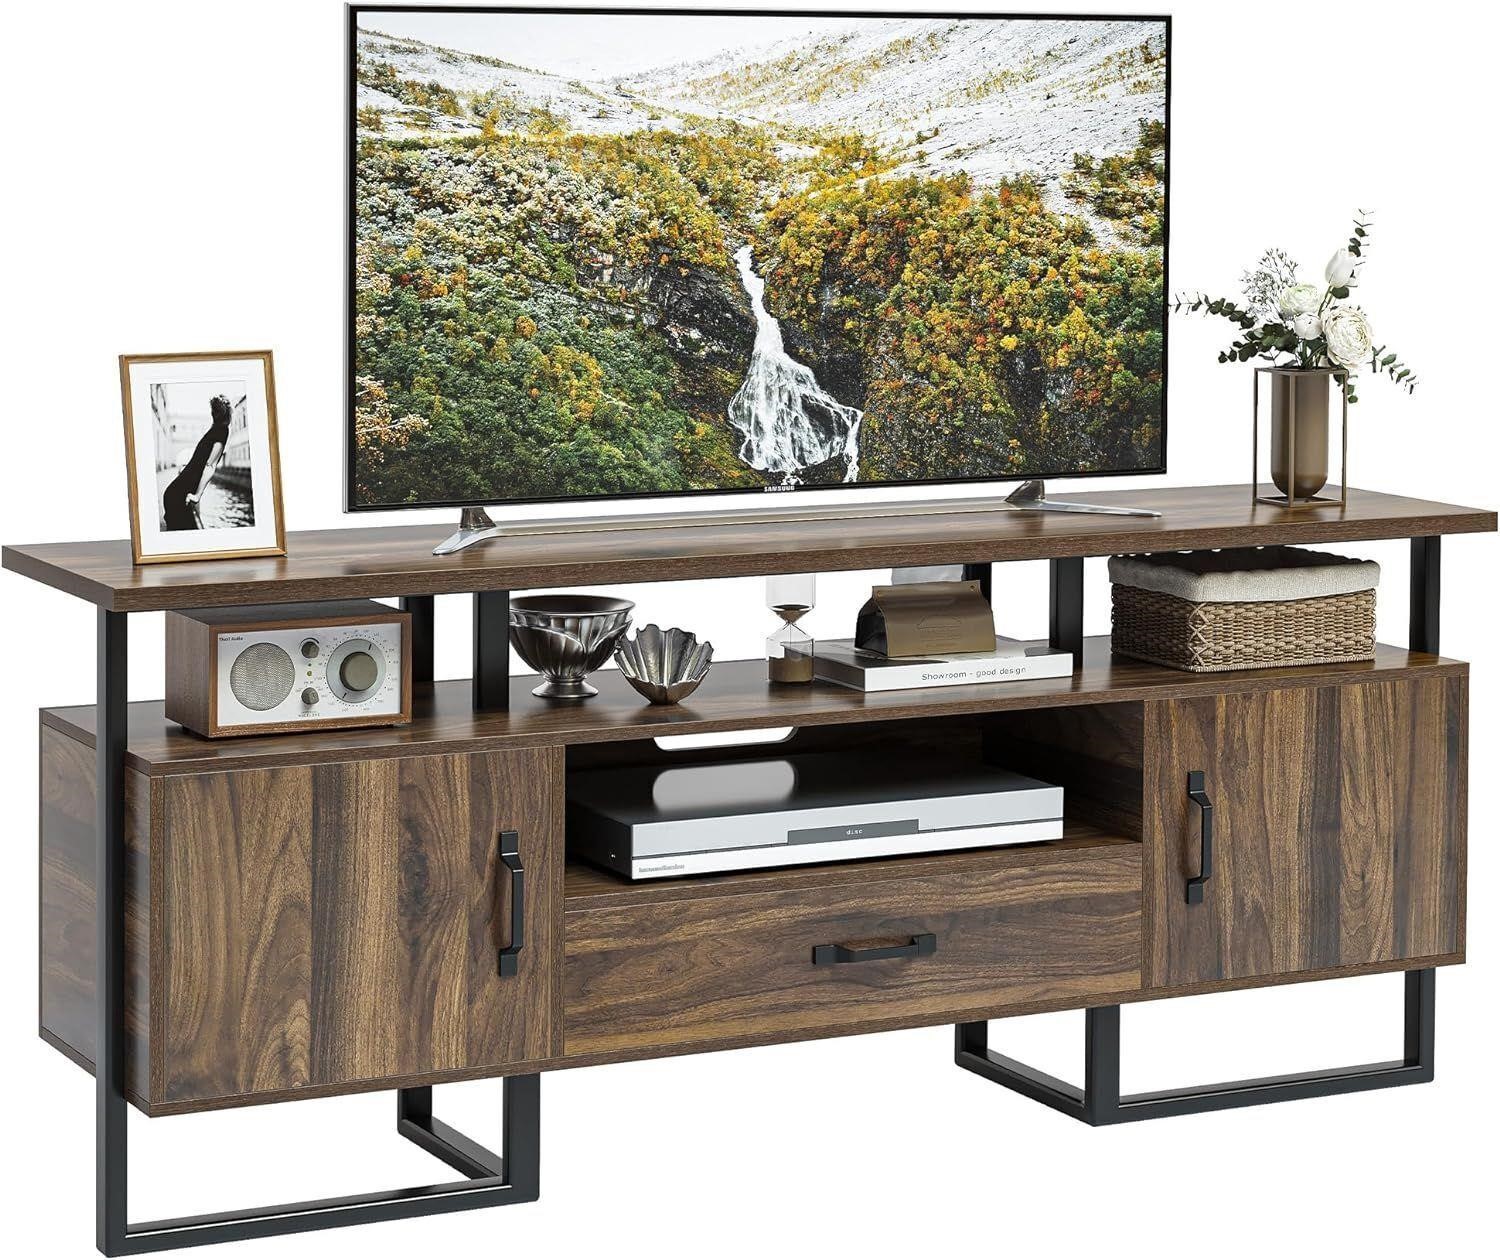 IDEALHOUSE TV Stand